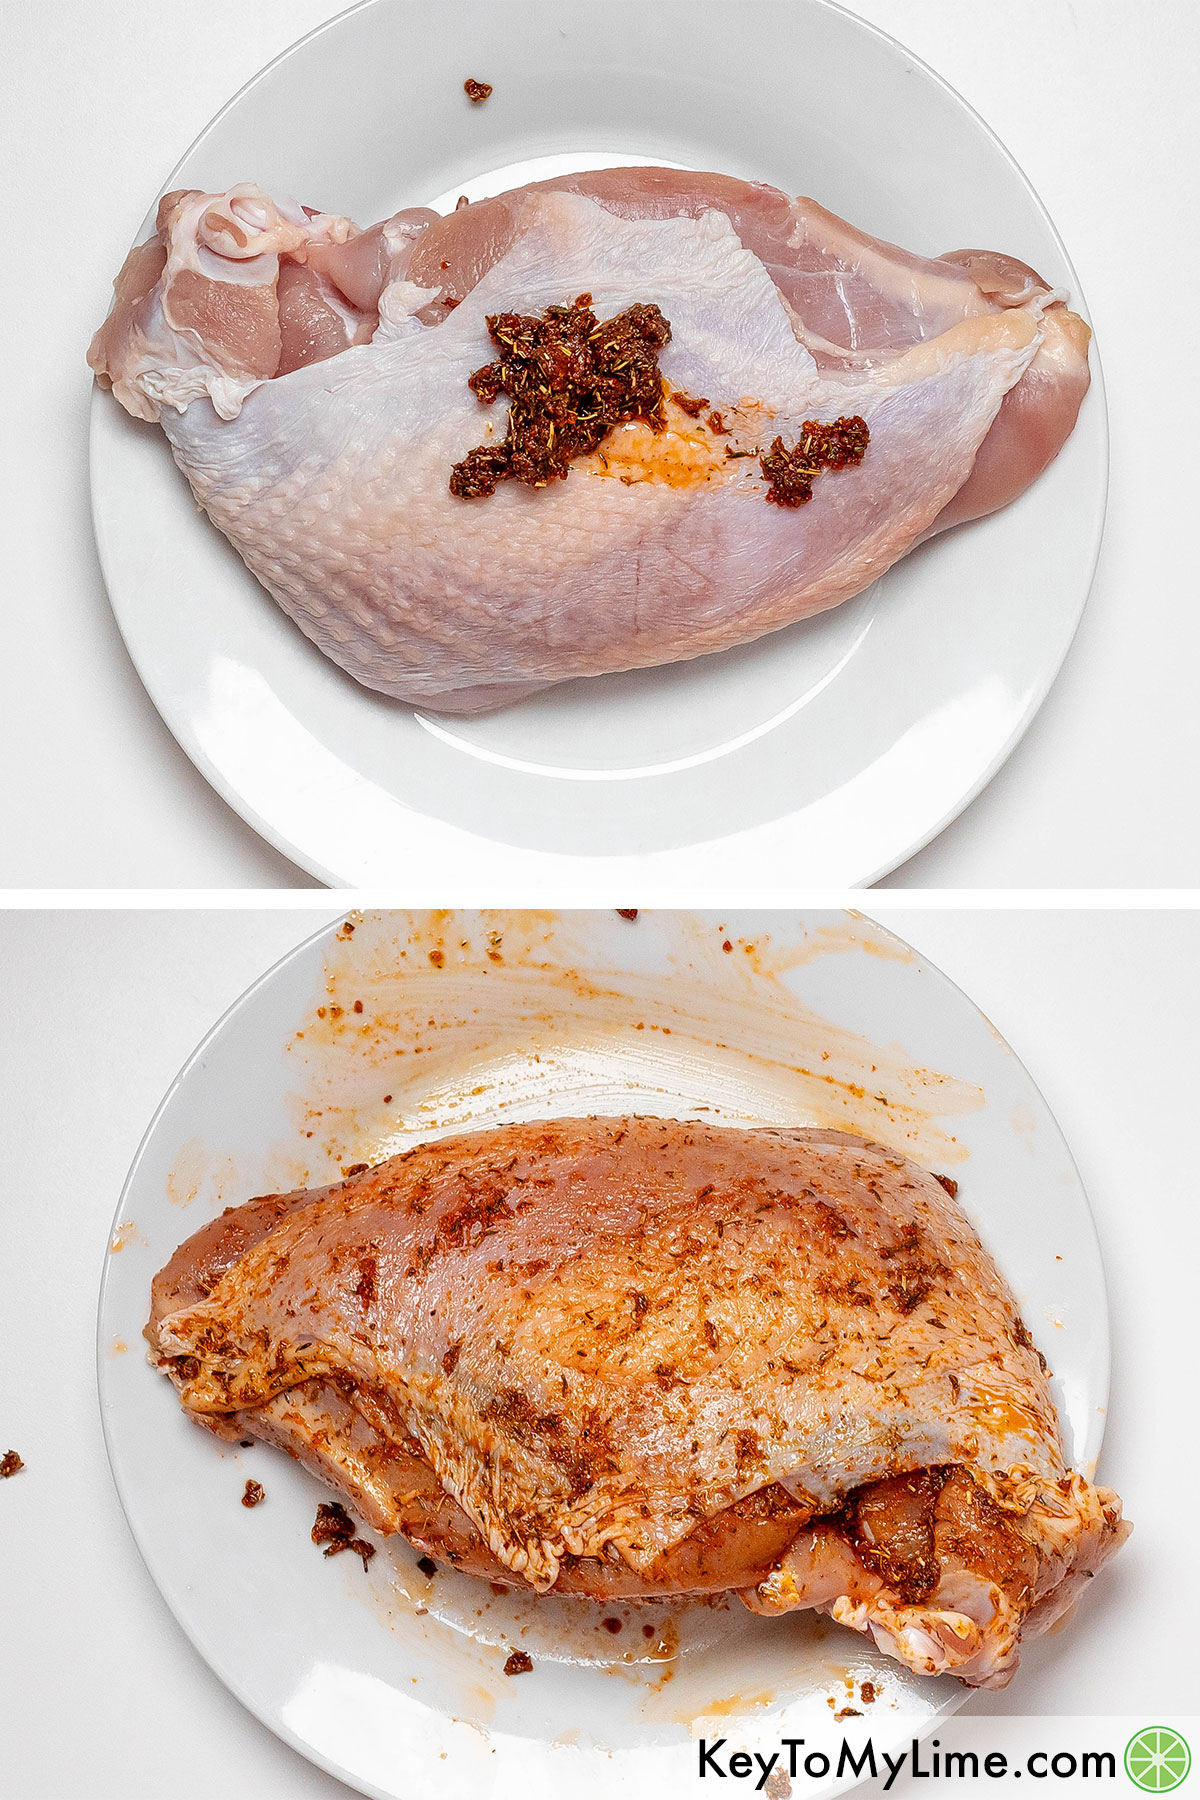 Adding the rub and massaging both sides of the turkey breast.